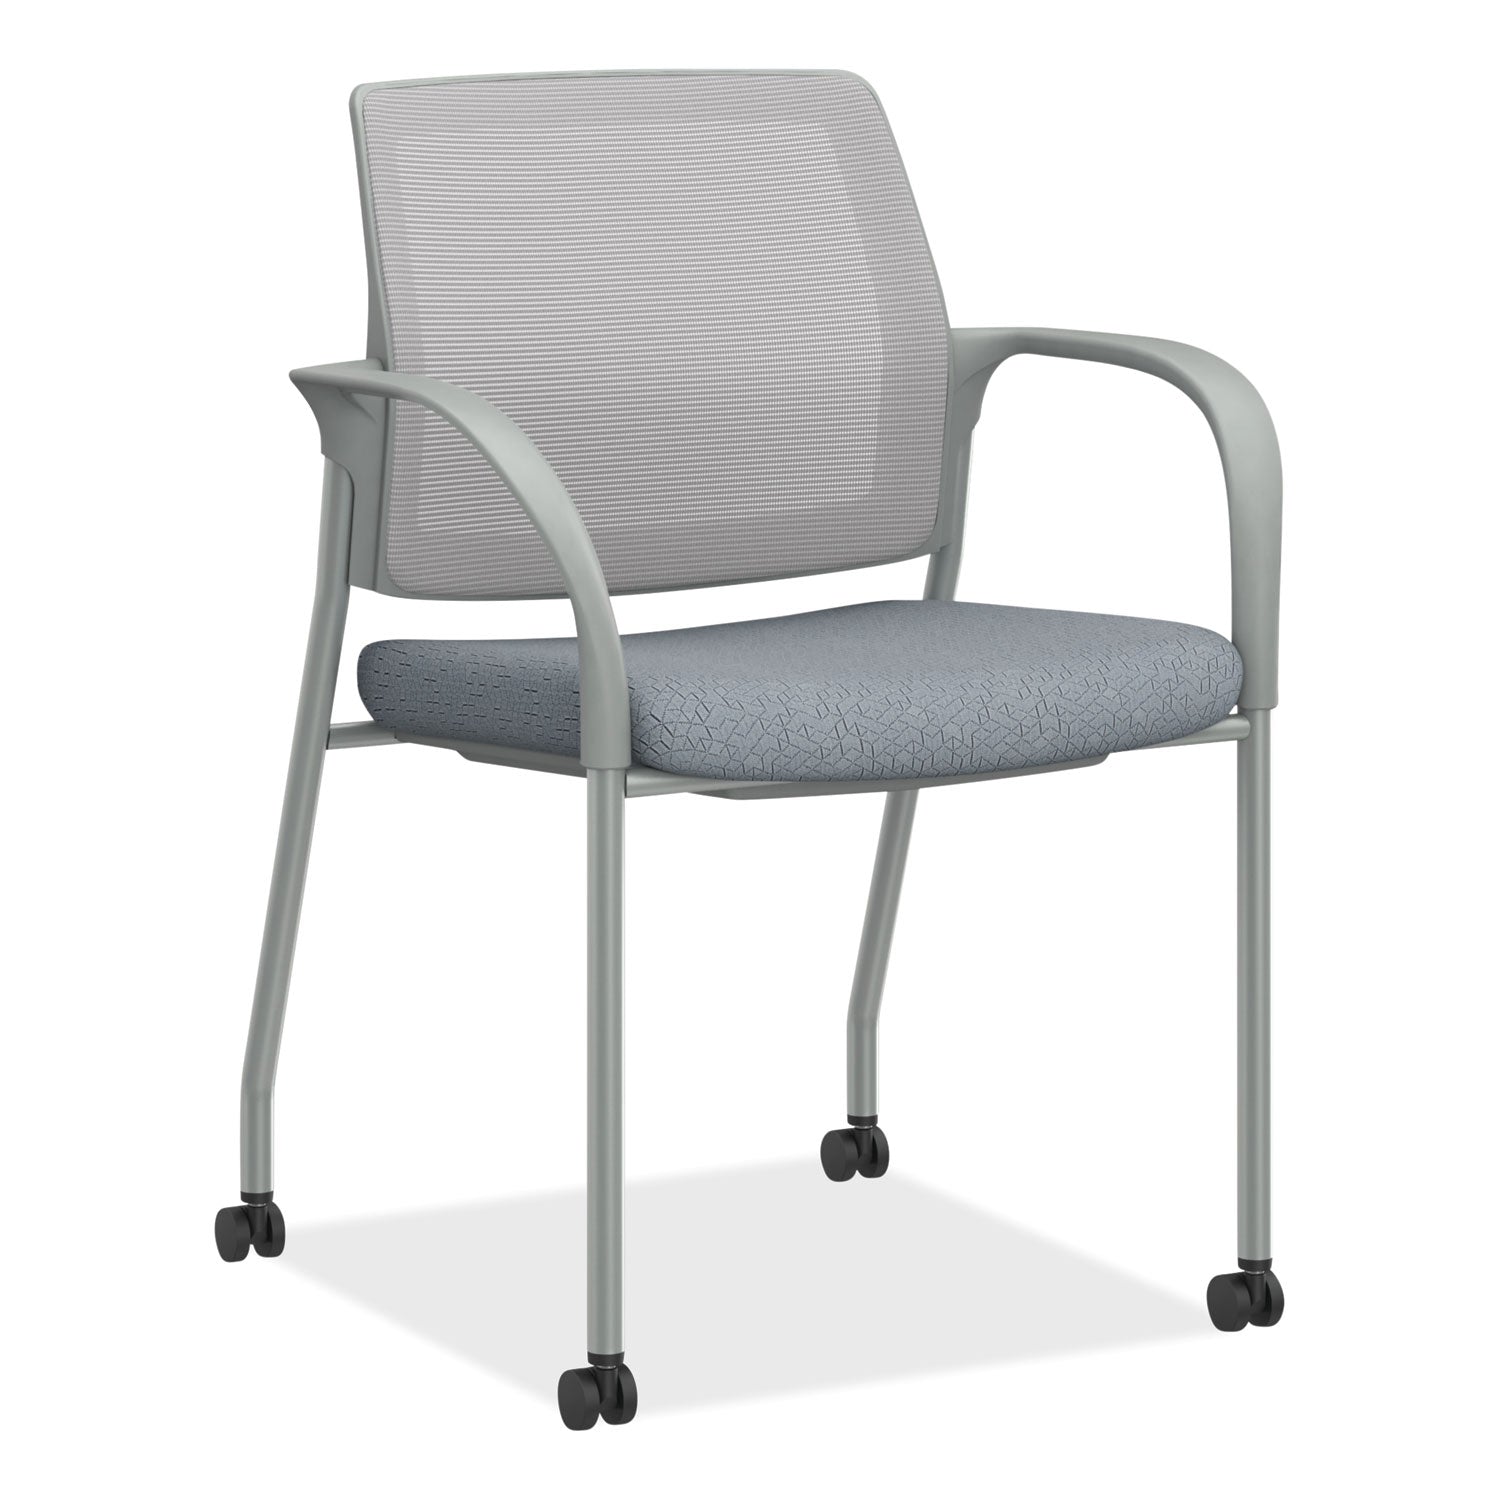 ignition-series-mesh-back-mobile-stacking-chair-25-x-2175-x-335-basalt-fog-textured-silver-base-ships-in-7-10-bus-days_honi2s6fhfa258t - 1